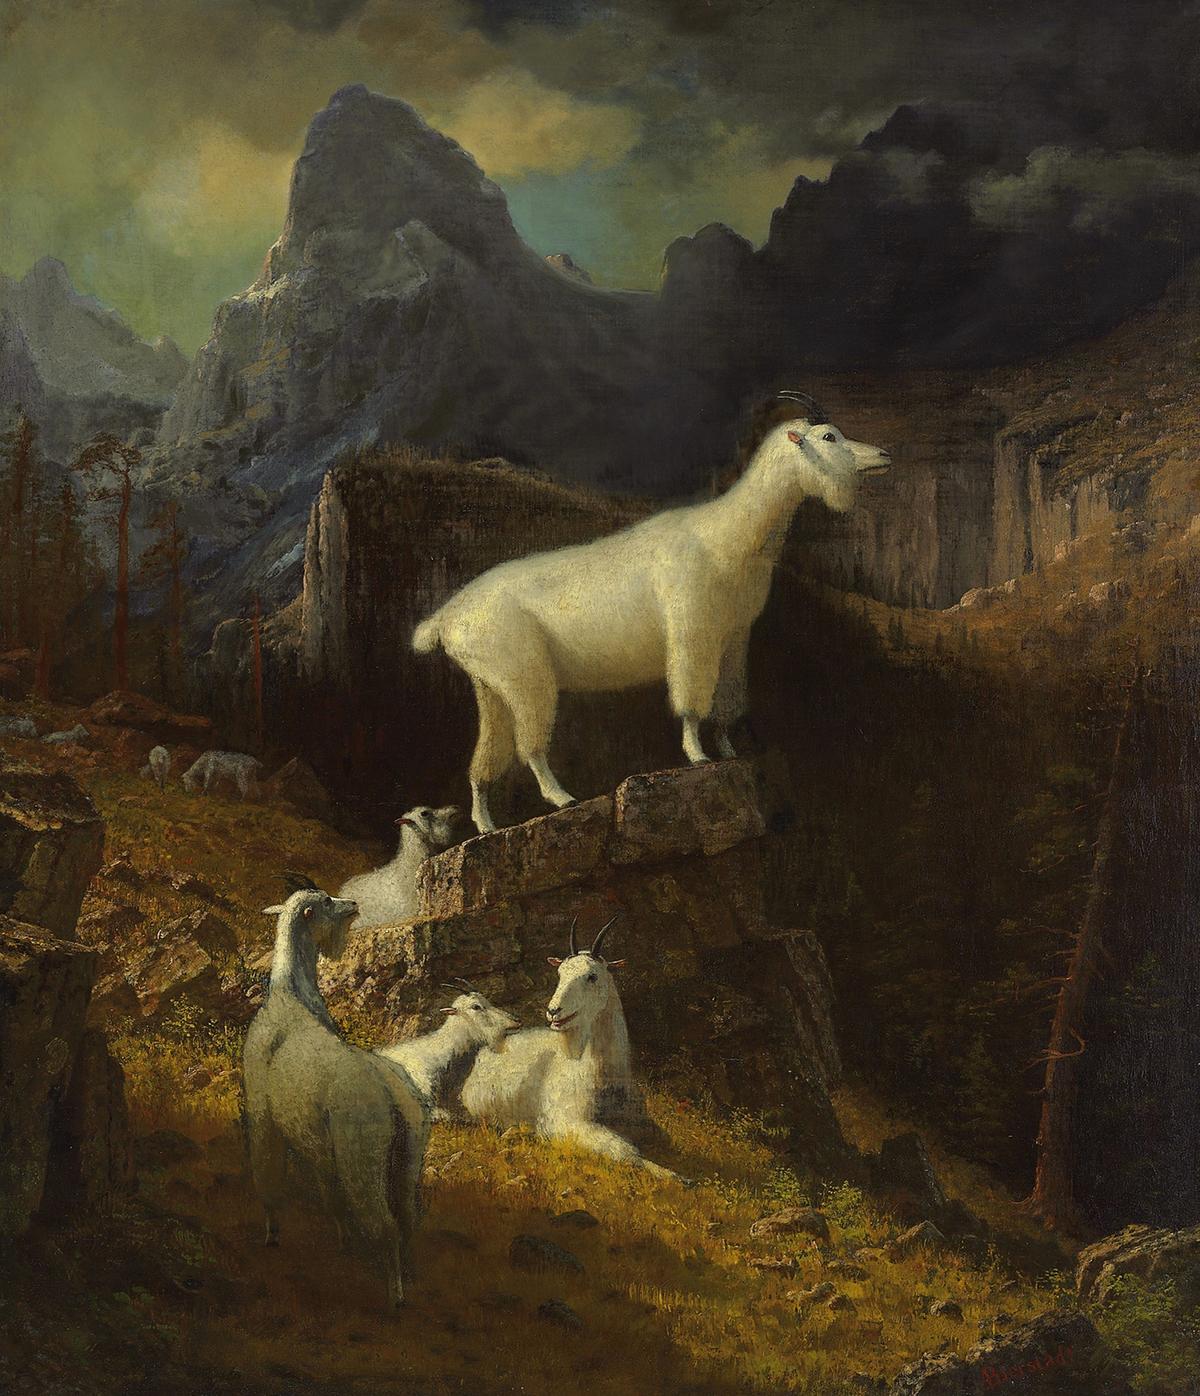 "Rocky Mountain Goats," circa 1885, by Albert Bierstadt. Oil on canvas; 50 1/4 inches by 43 1/4 inches. Private collection. (Public Domain)